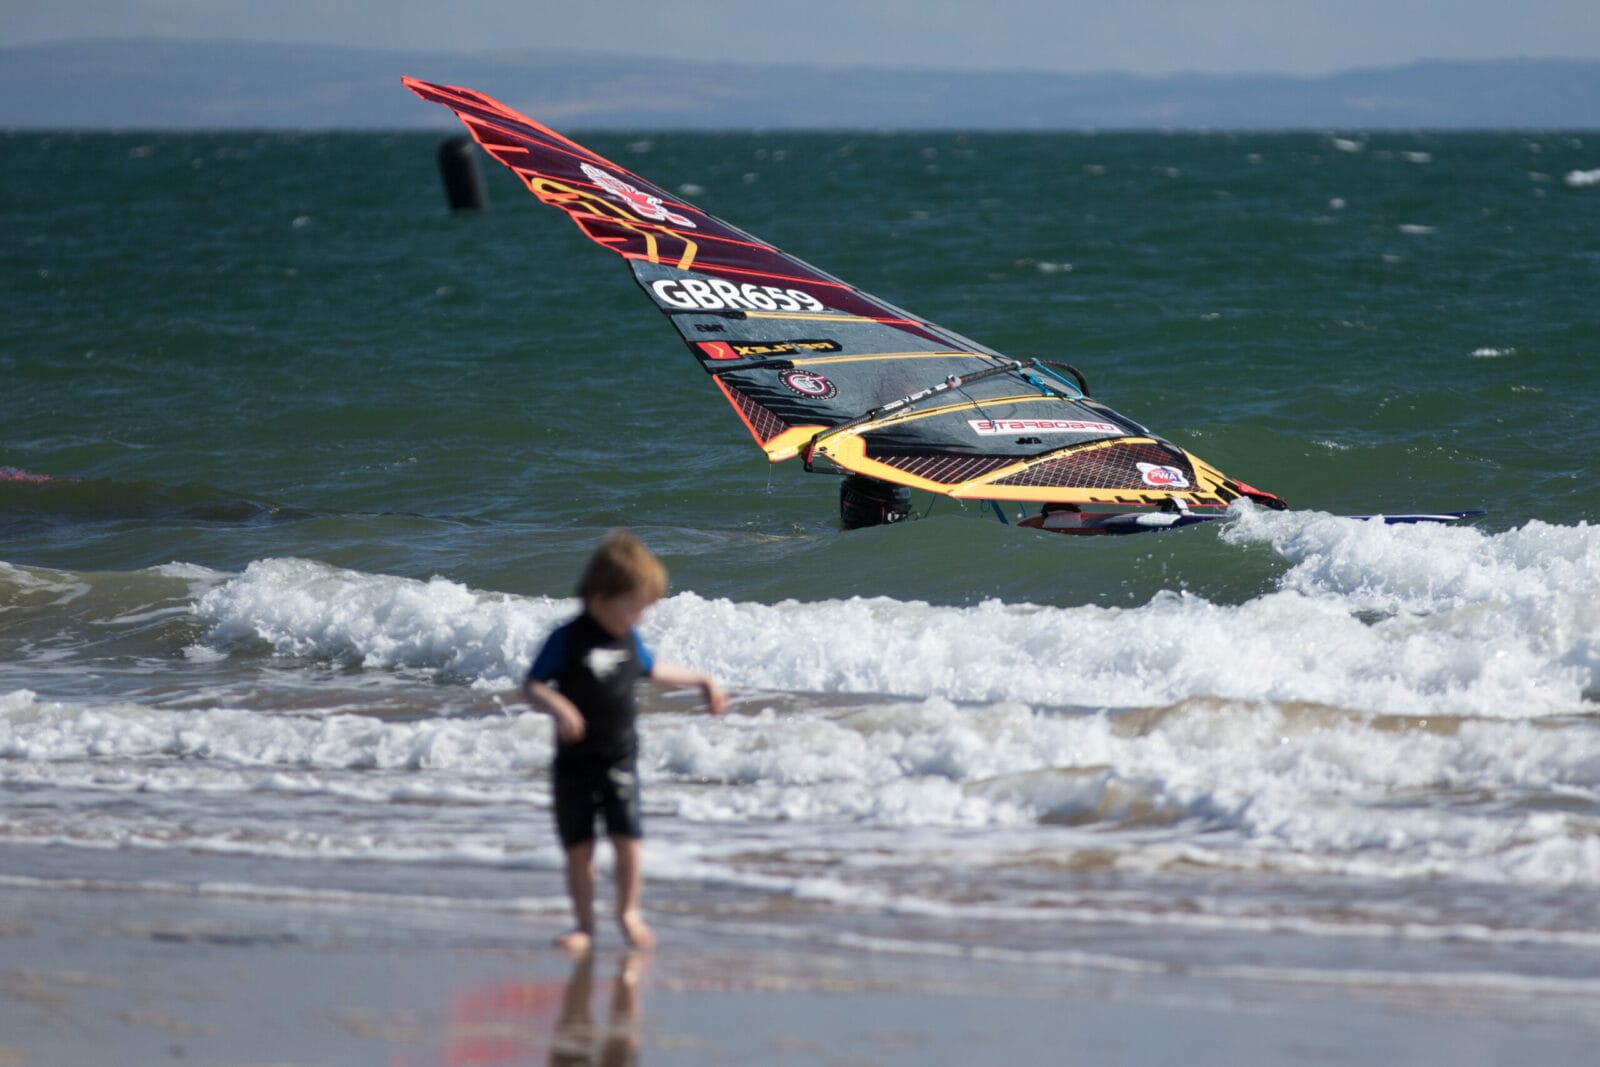 Windsurfing boards for racing